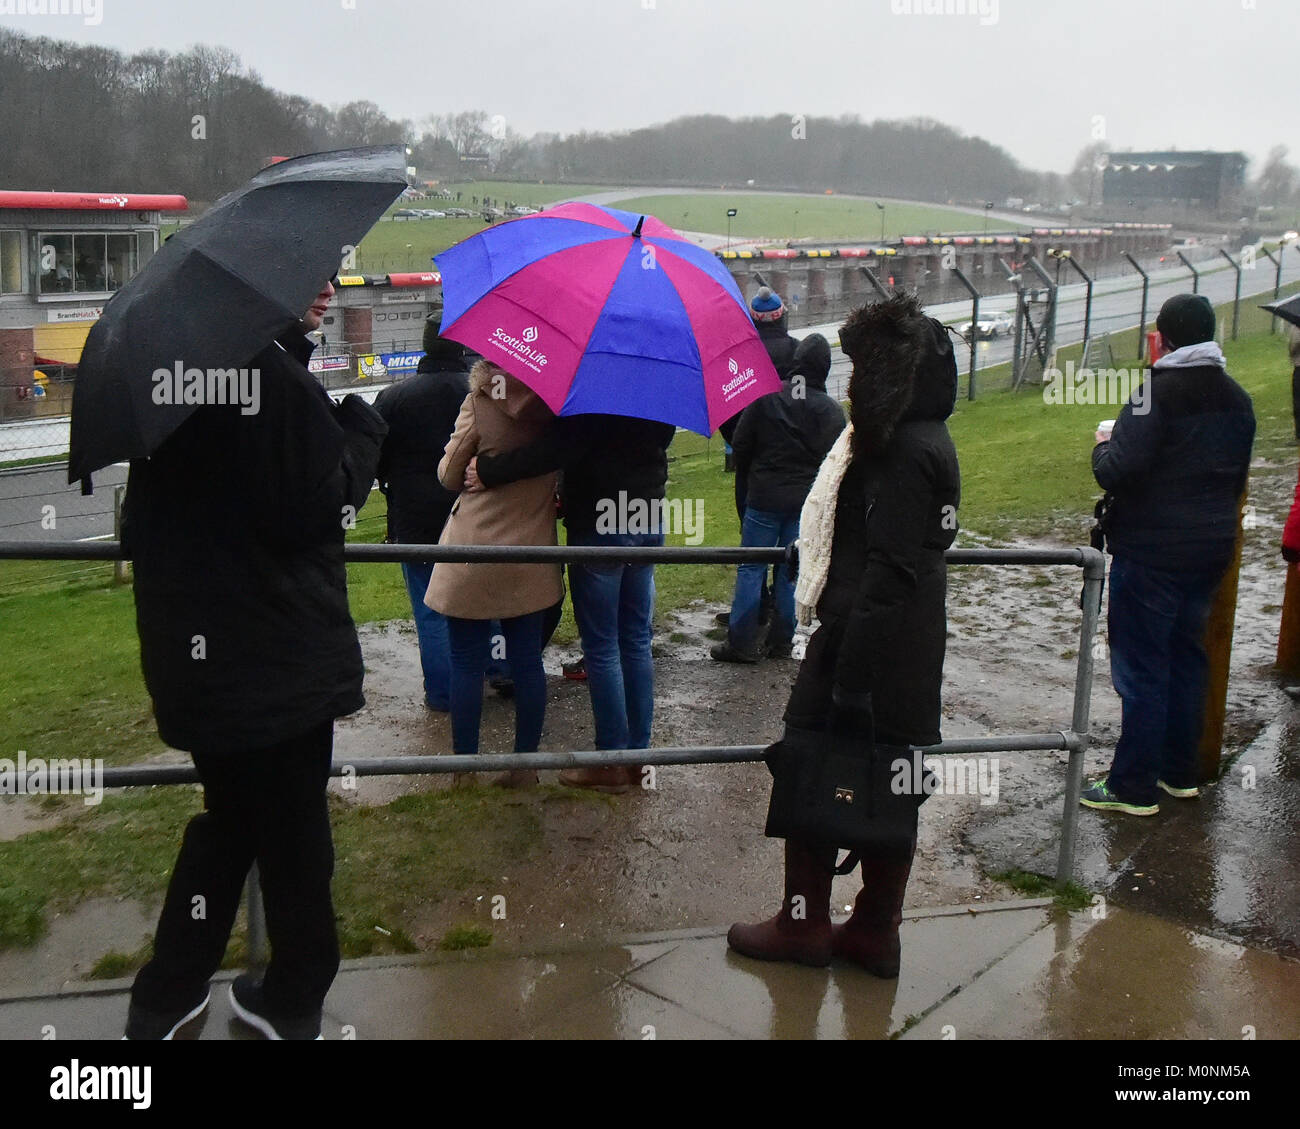 A wet day at Brands Hatch, MGJ Rally Stages, Chelmsford Motor Club, Brands Hatch,  Saturday, 20th January 2018, MSV, Circuit Rally Championship, MSVR, Stock Photo